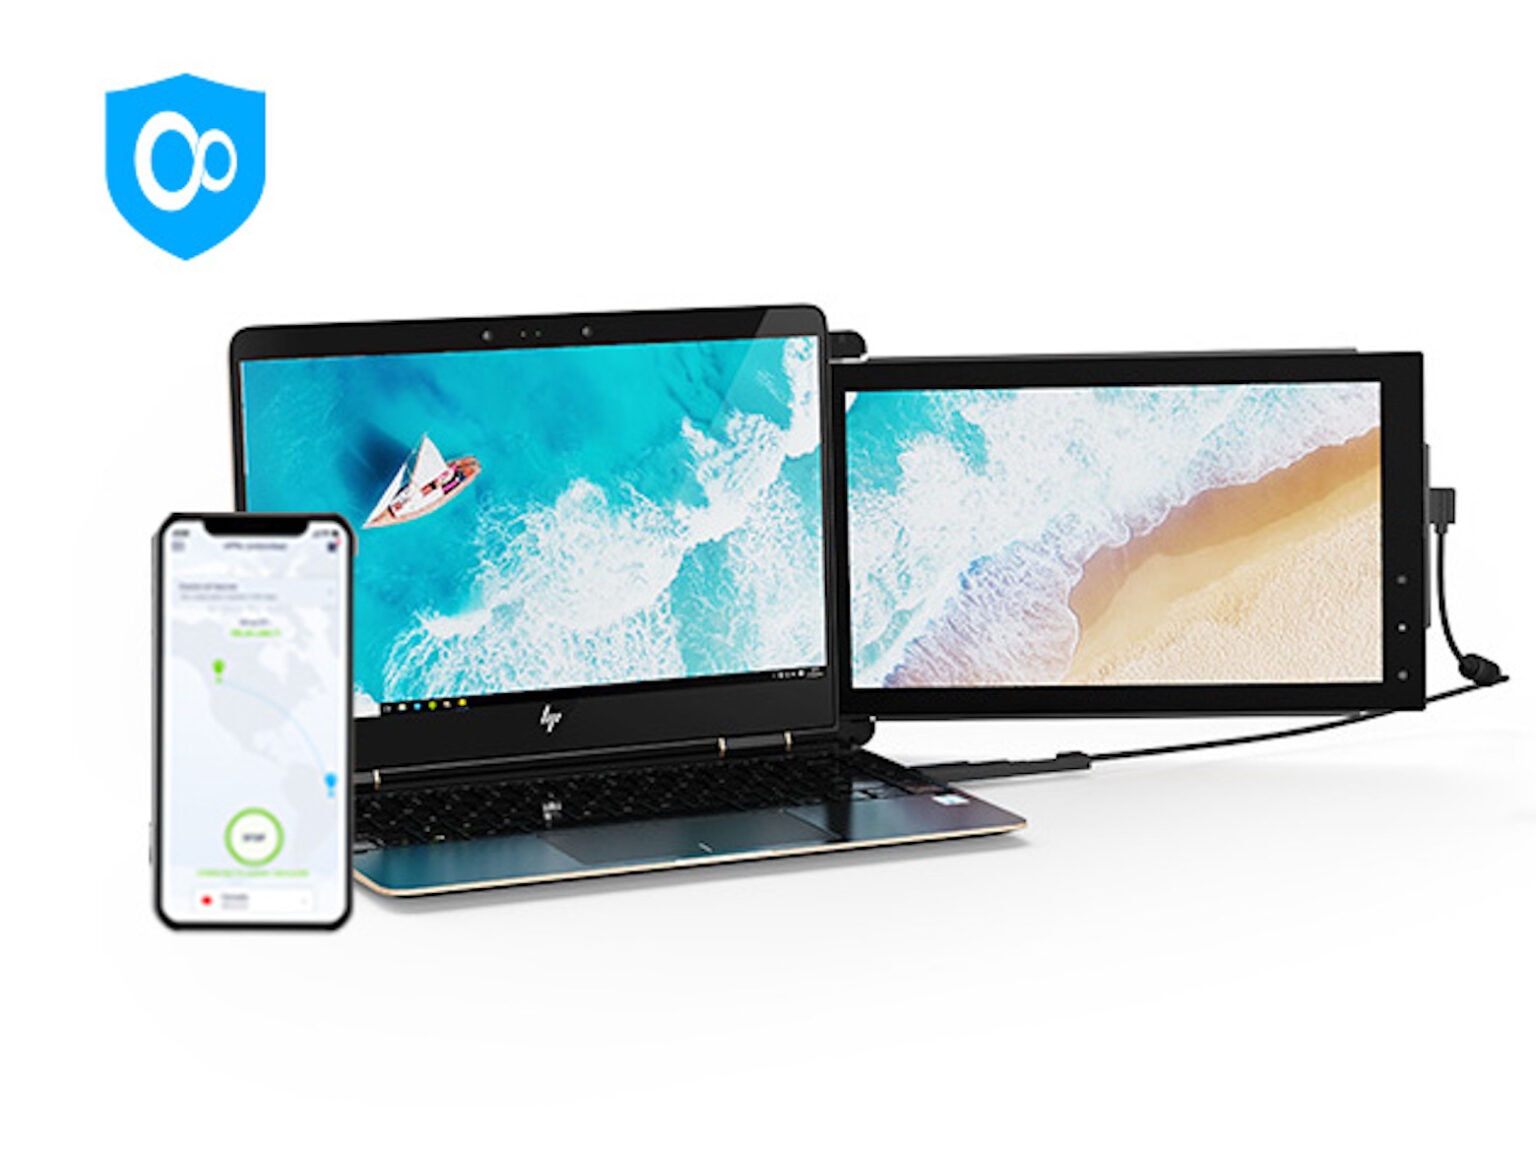 Turn your laptop into a triple screen display from anywhere, and get lifetime access to this award-winning VPN.